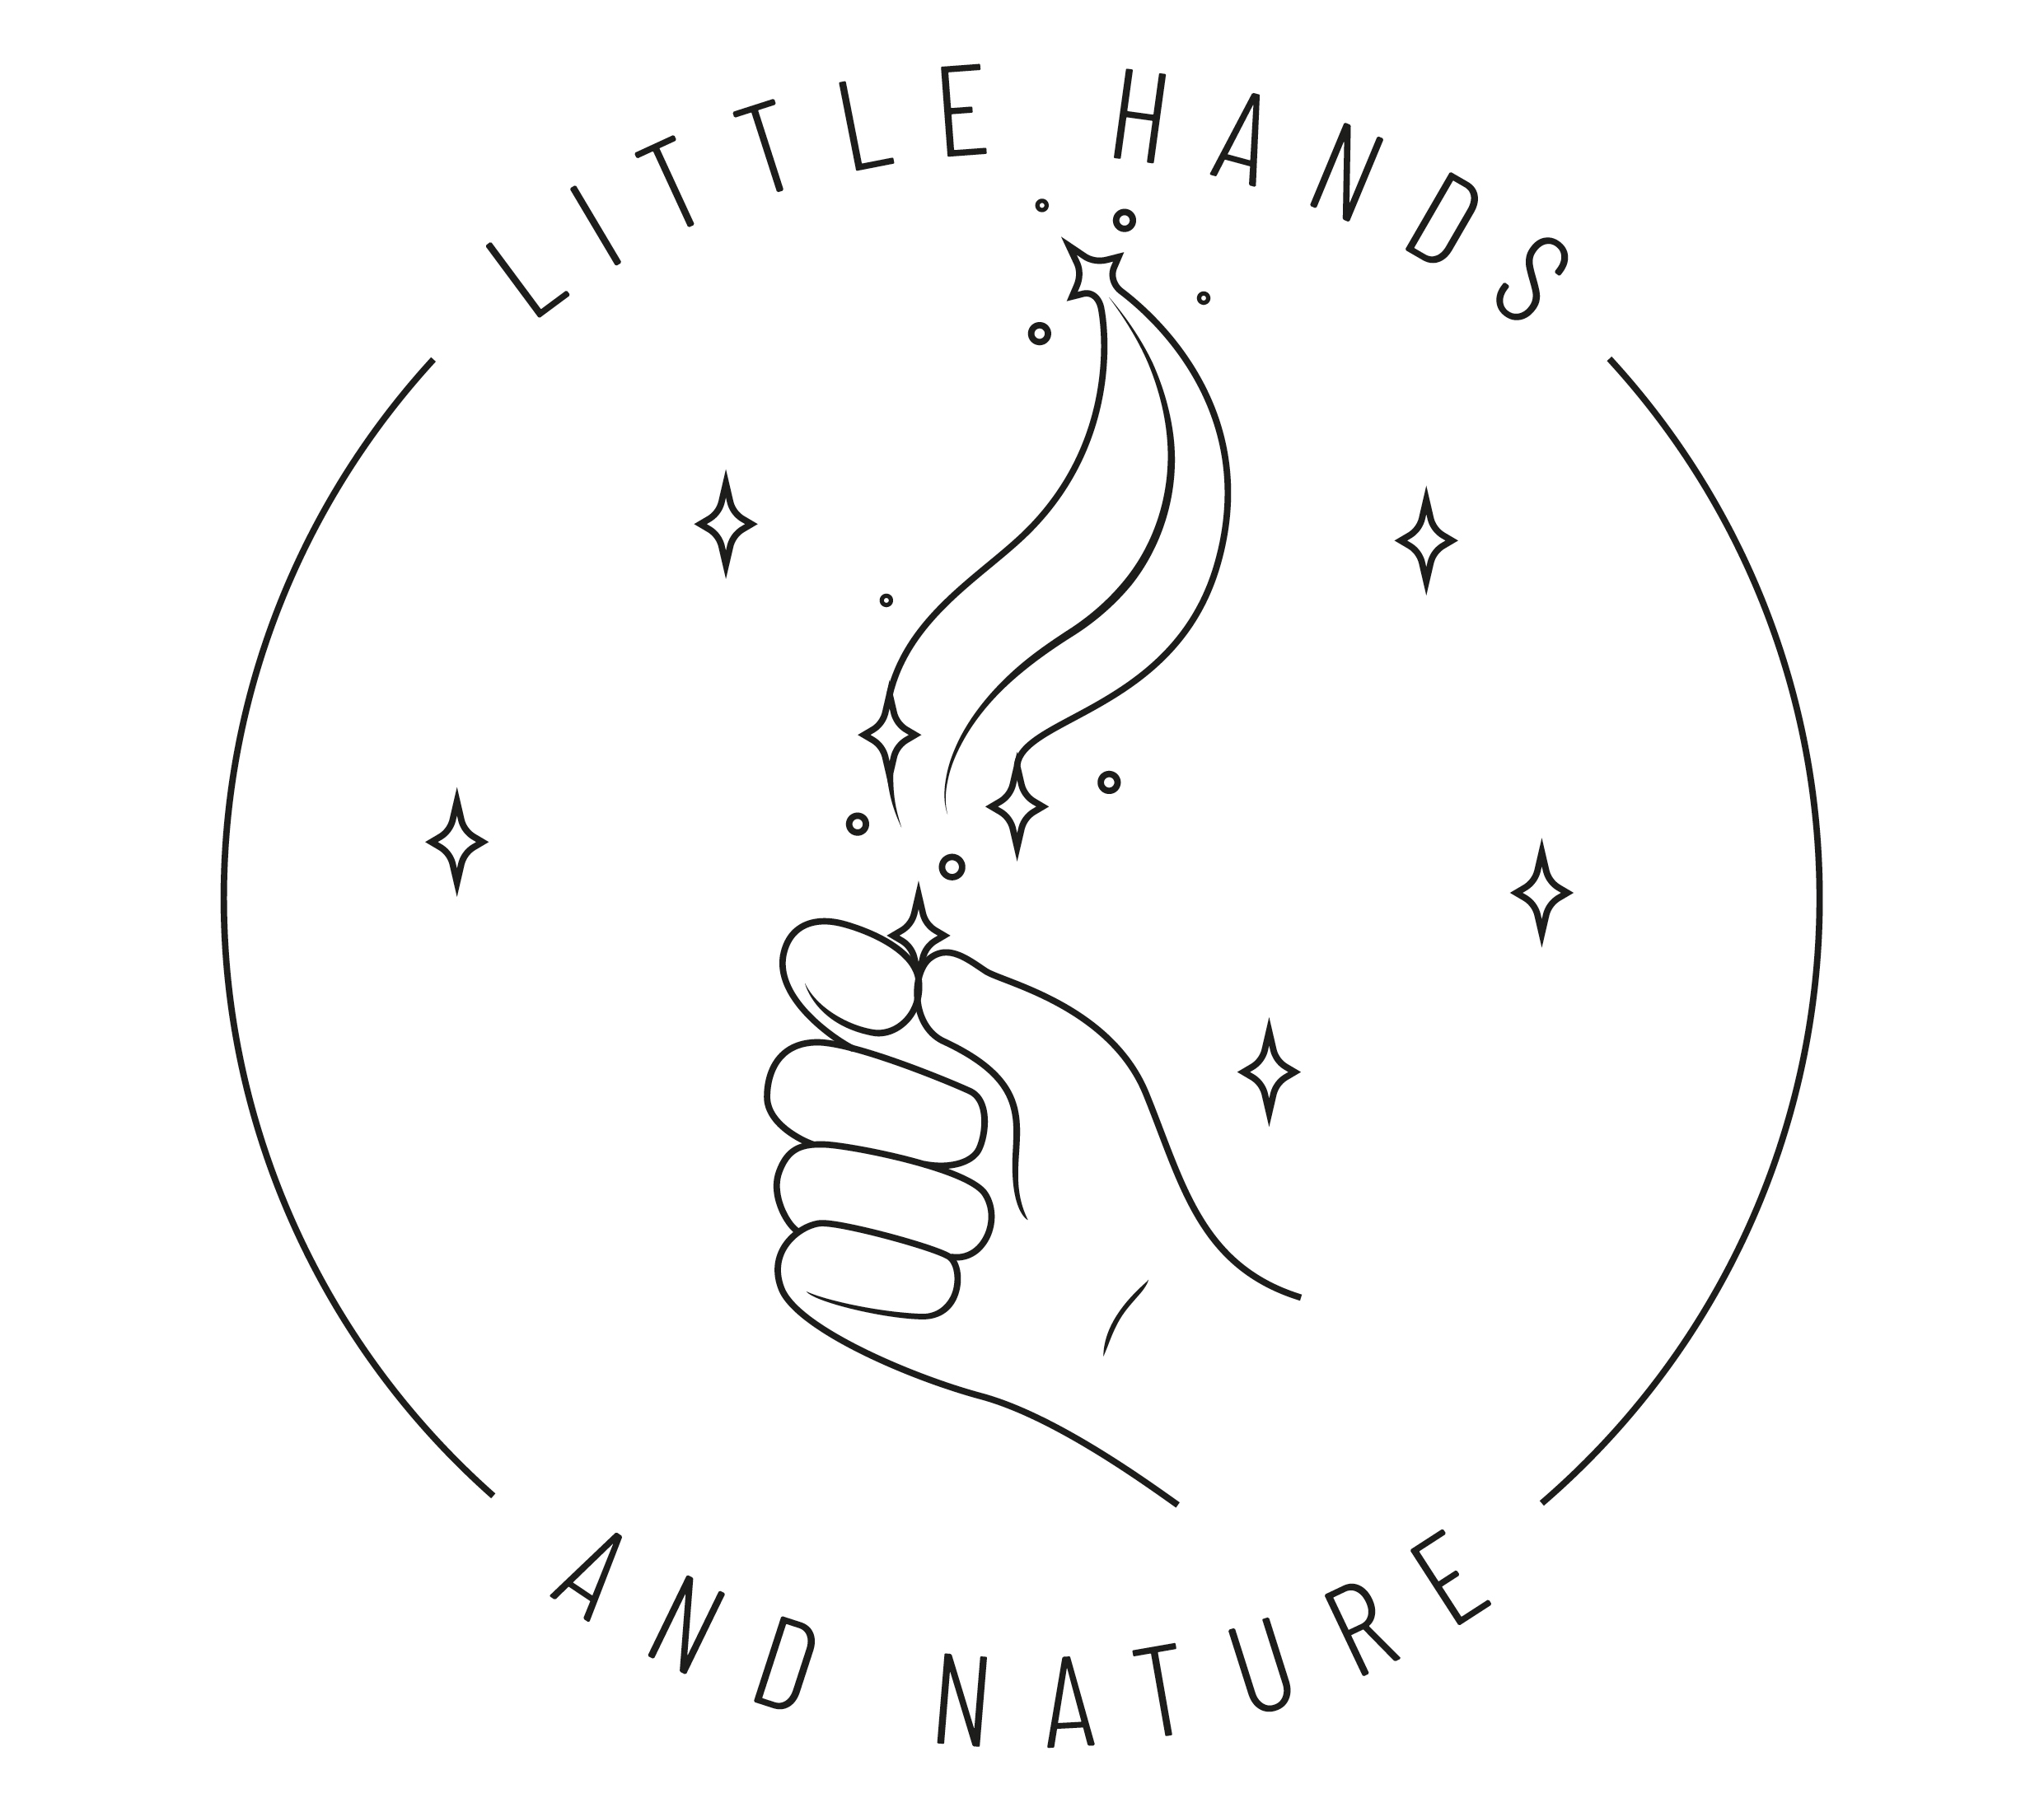 Little Hands and Nature